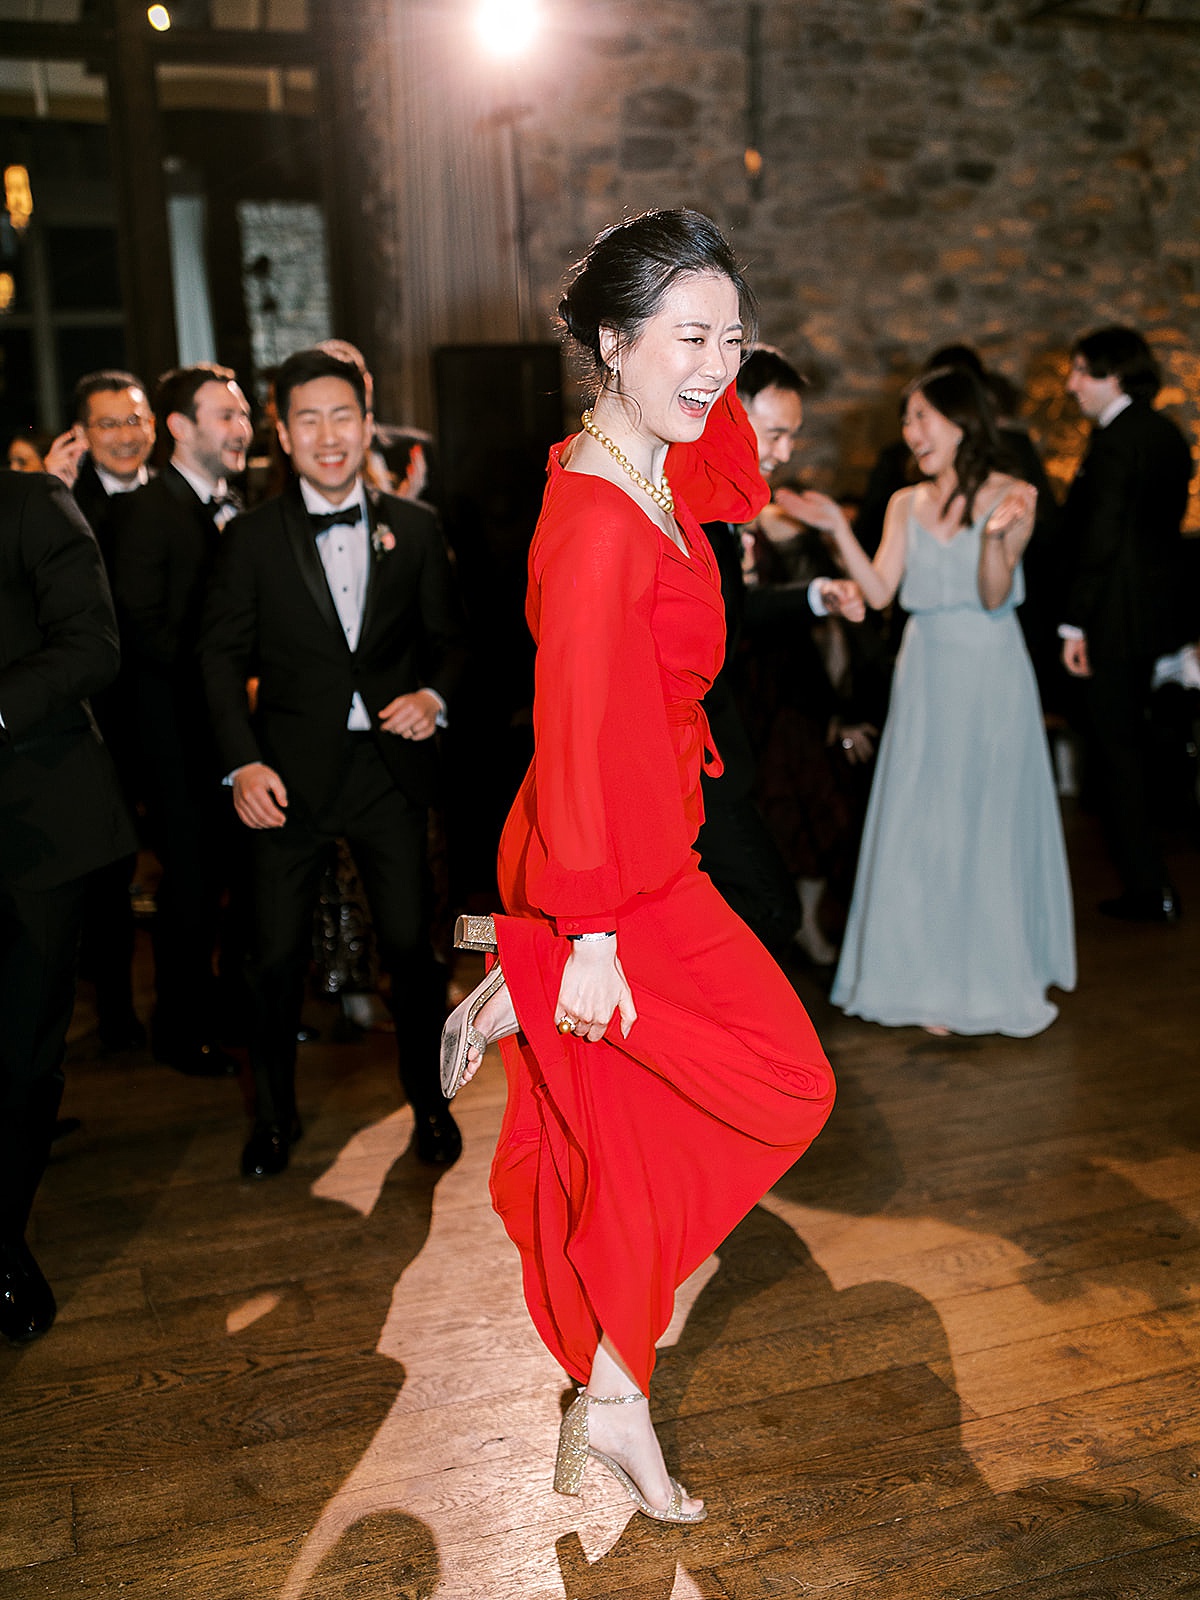 Bride in elegant red evening gown celebrates with a dance at black tie wedding reception shot by Sophie Kaye Photography